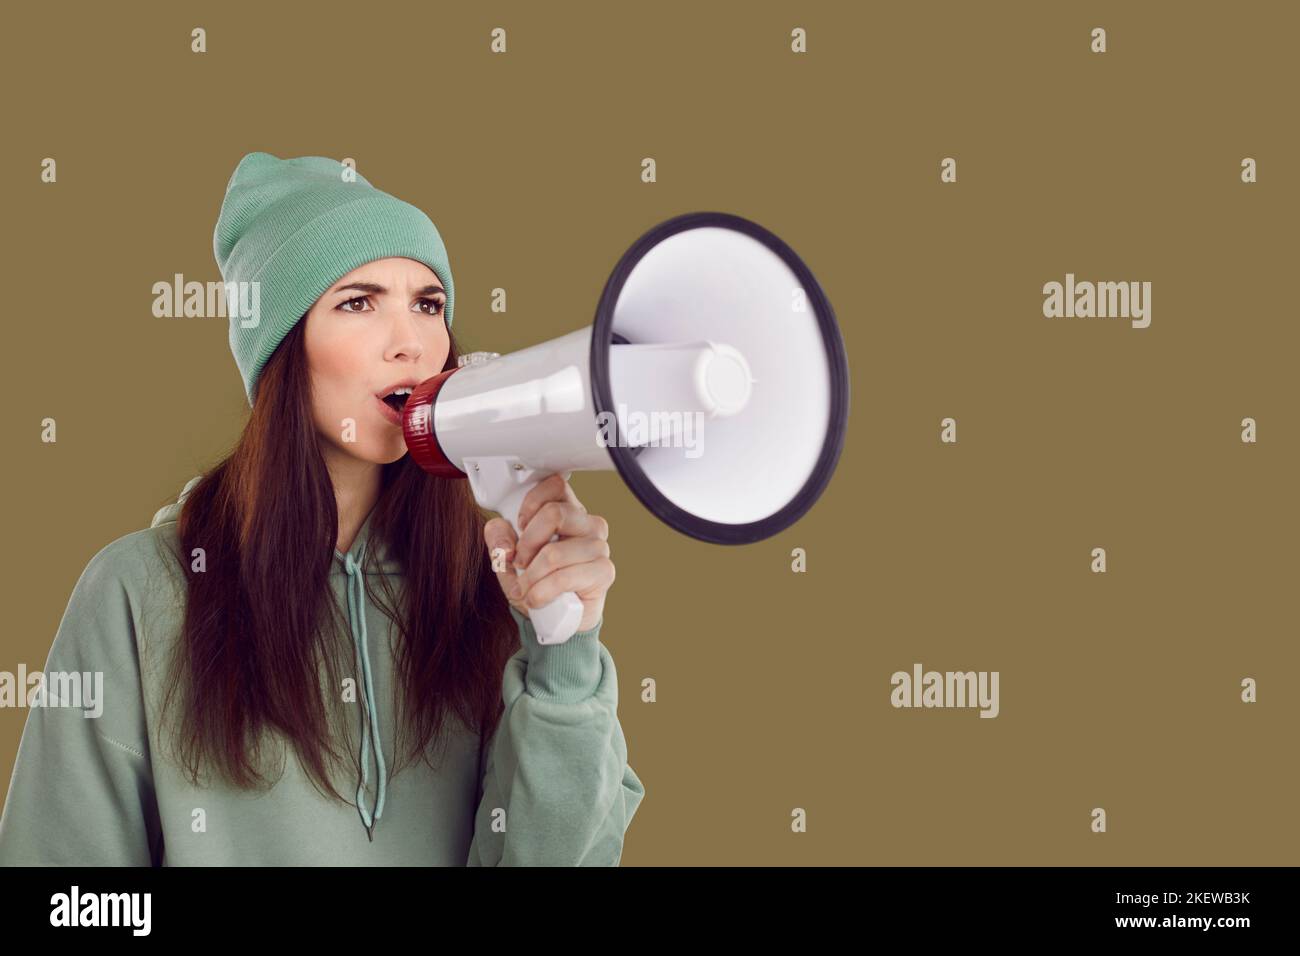 Serious female activist with megaphone in her hand makes loud announcement on brown background. Stock Photo